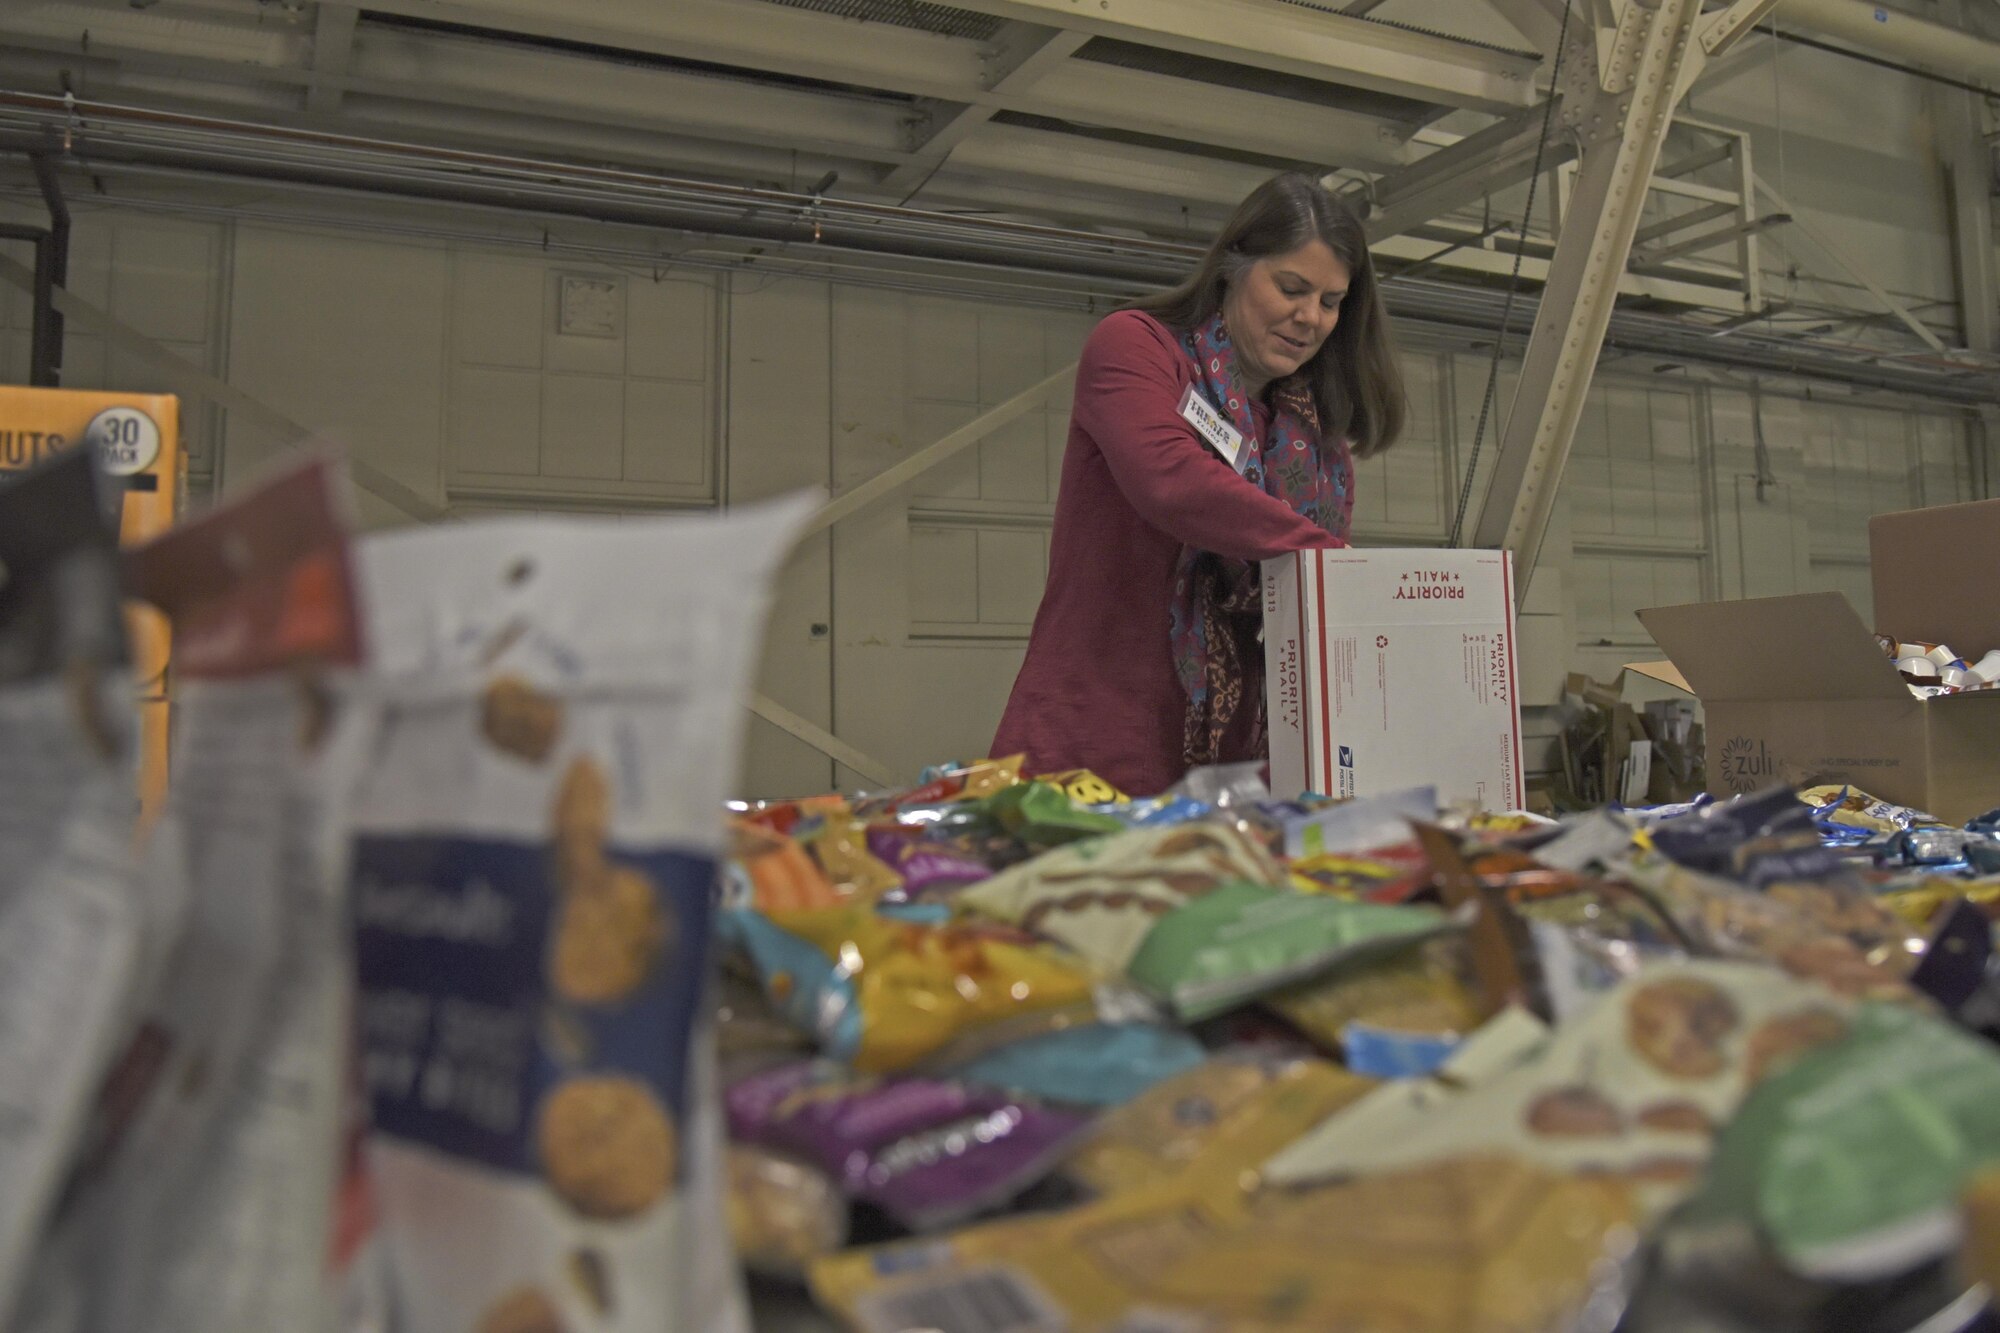 Kelley Cargle, Officer Spouses’ Club vice president of operations, packs a Treats 2 Troops care package with snacks Nov. 29, 2017, at Fairchild Air Force Base, Washington. KREM 2 News began collecting donations the beginning of November and collected thousands of items in less than a month to benefit military members serving overseas during the holiday season. (U.S. Air Force photo/Senior Airman Mackenzie Richardson)